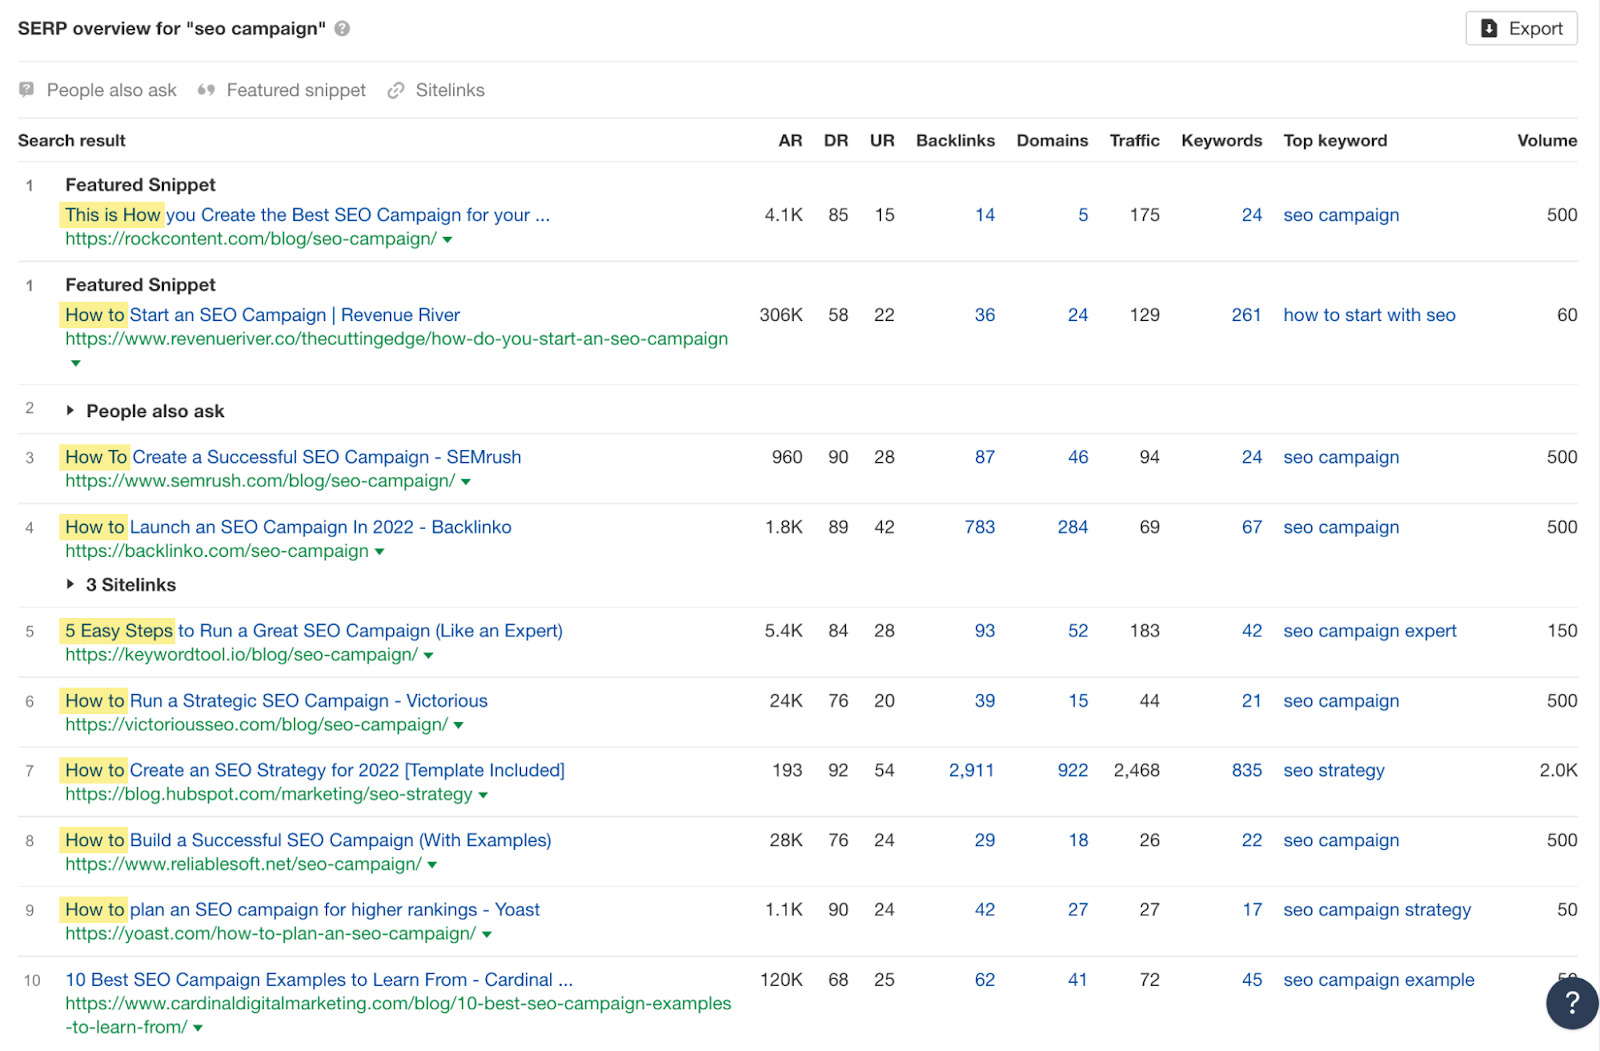 SERP overview for "seo campaign"; all results are guides 